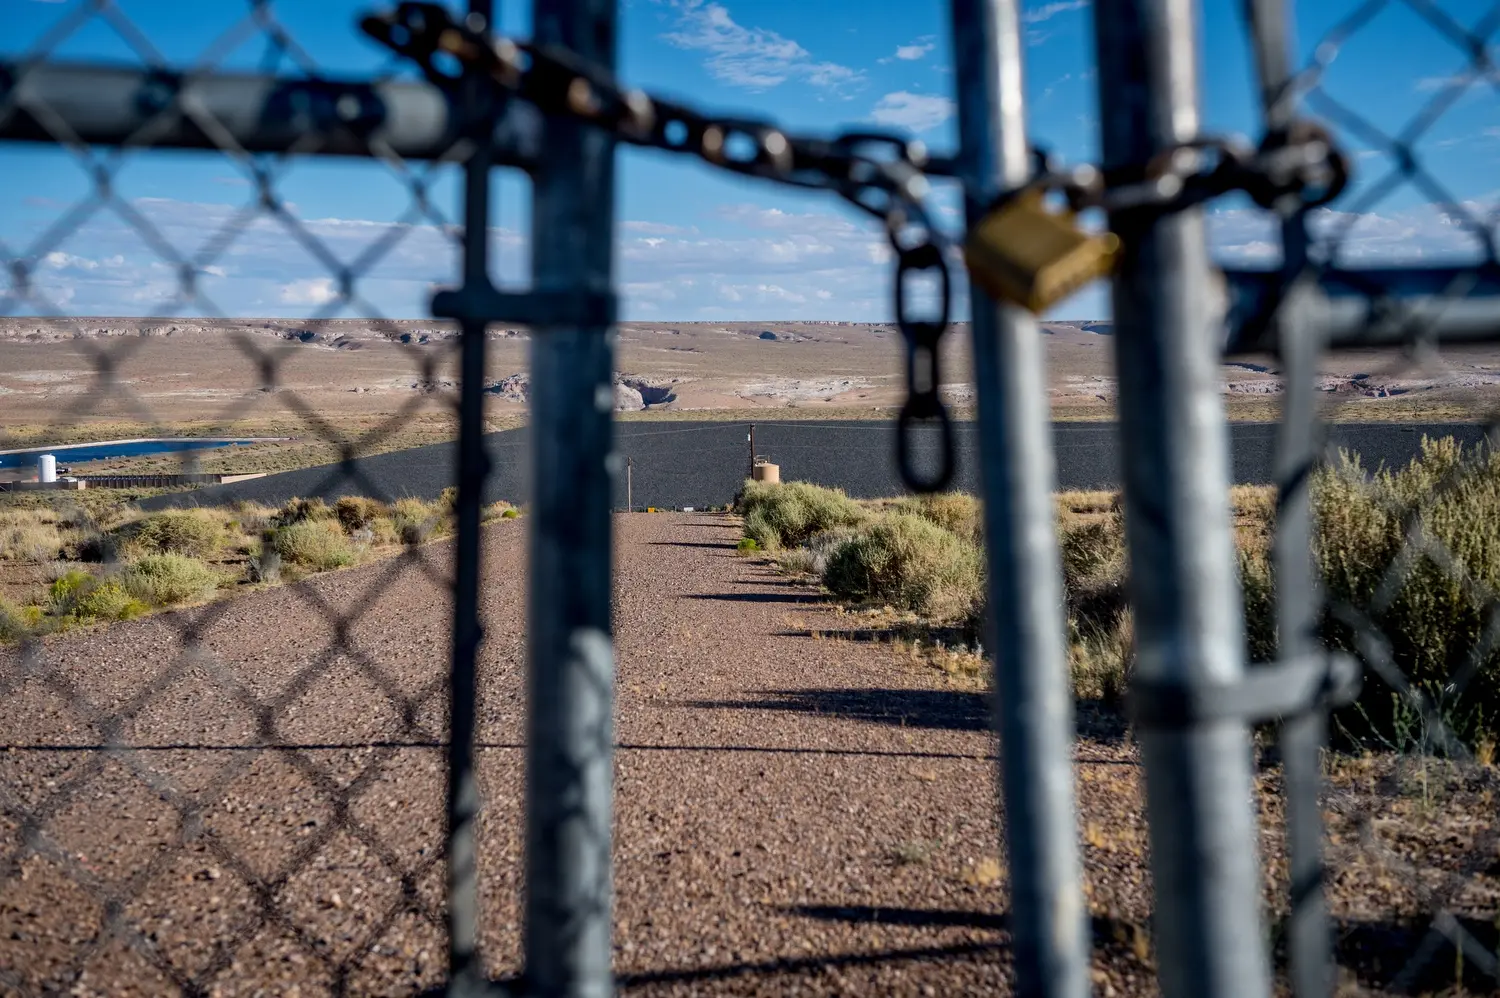 The fence surrounding the capped uranium mill site operated by the Rare Metals Corporation outside Tuba City. Image by Mary F. Calvert. United States, 2020.